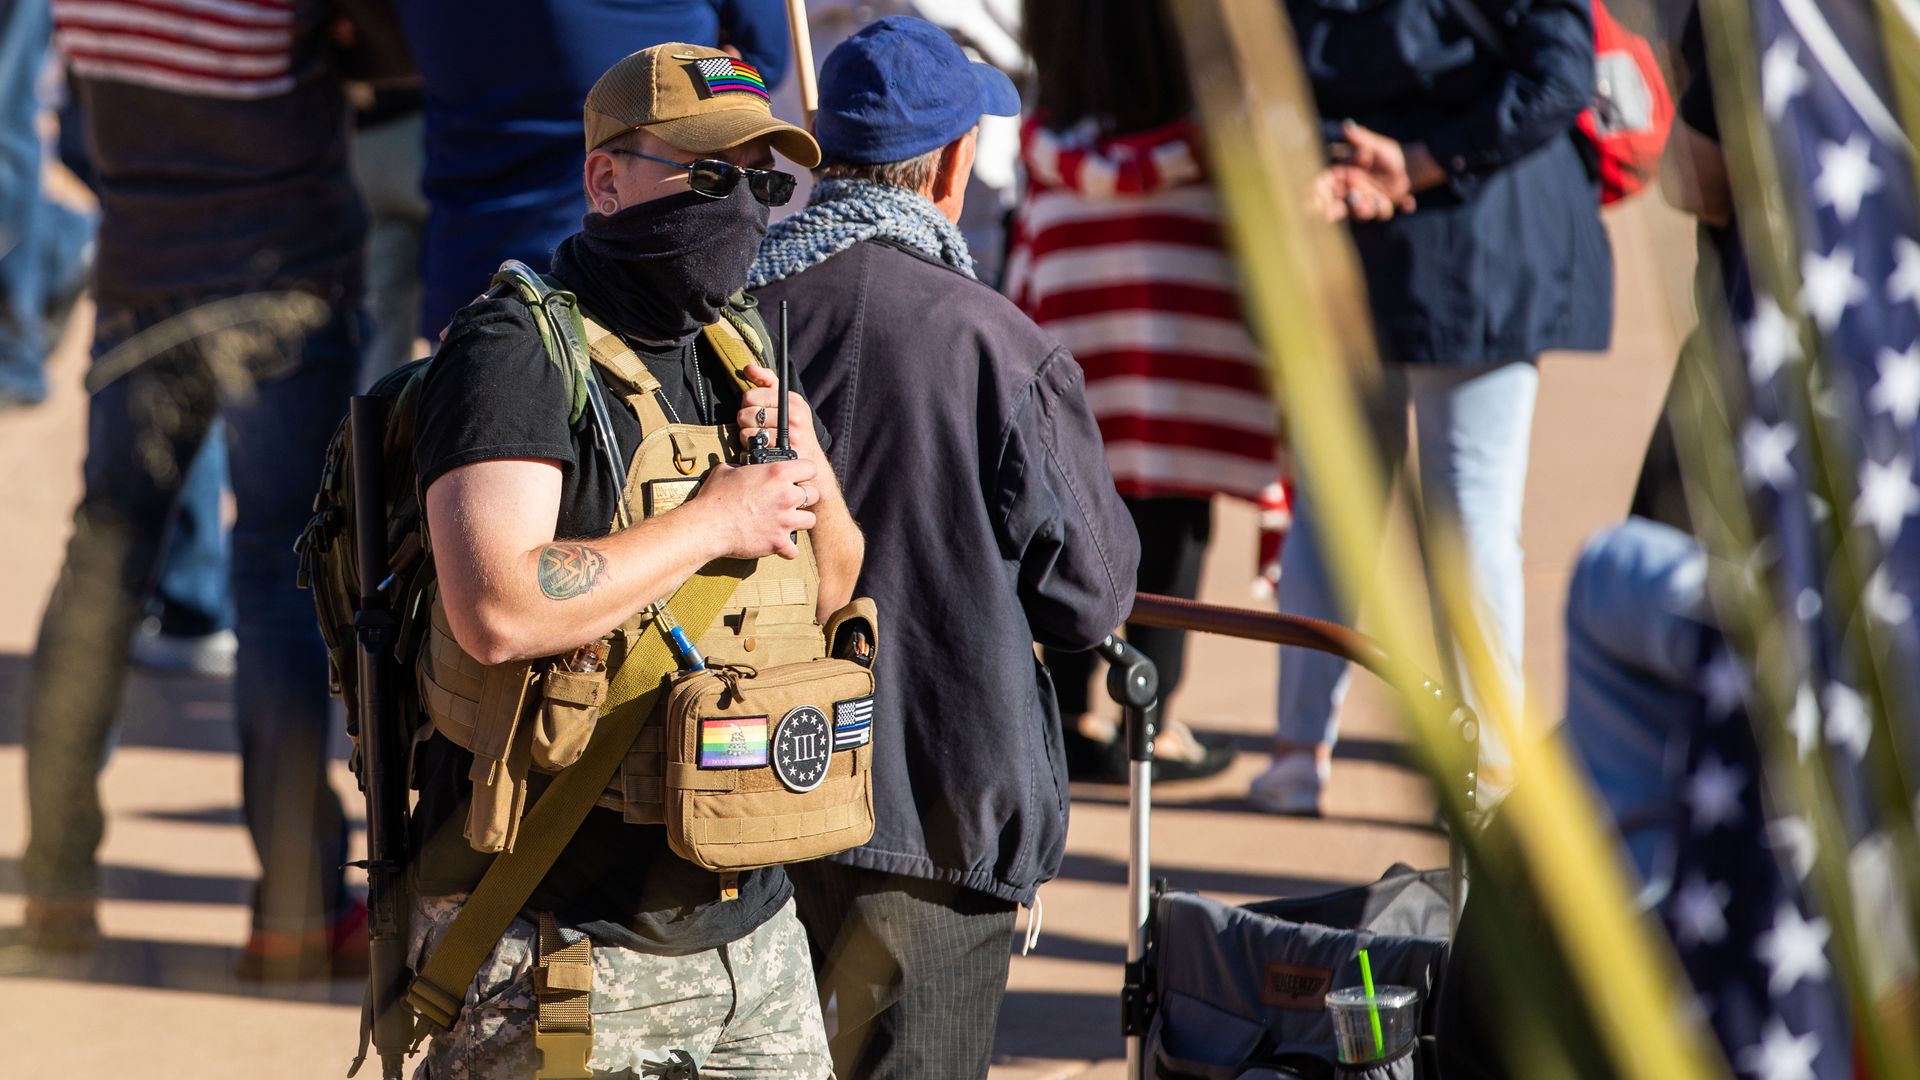 A person wearing a tactical vest with a Three Percenters patch at a Trump rally in Phoenix on Jan. 6, 2021.